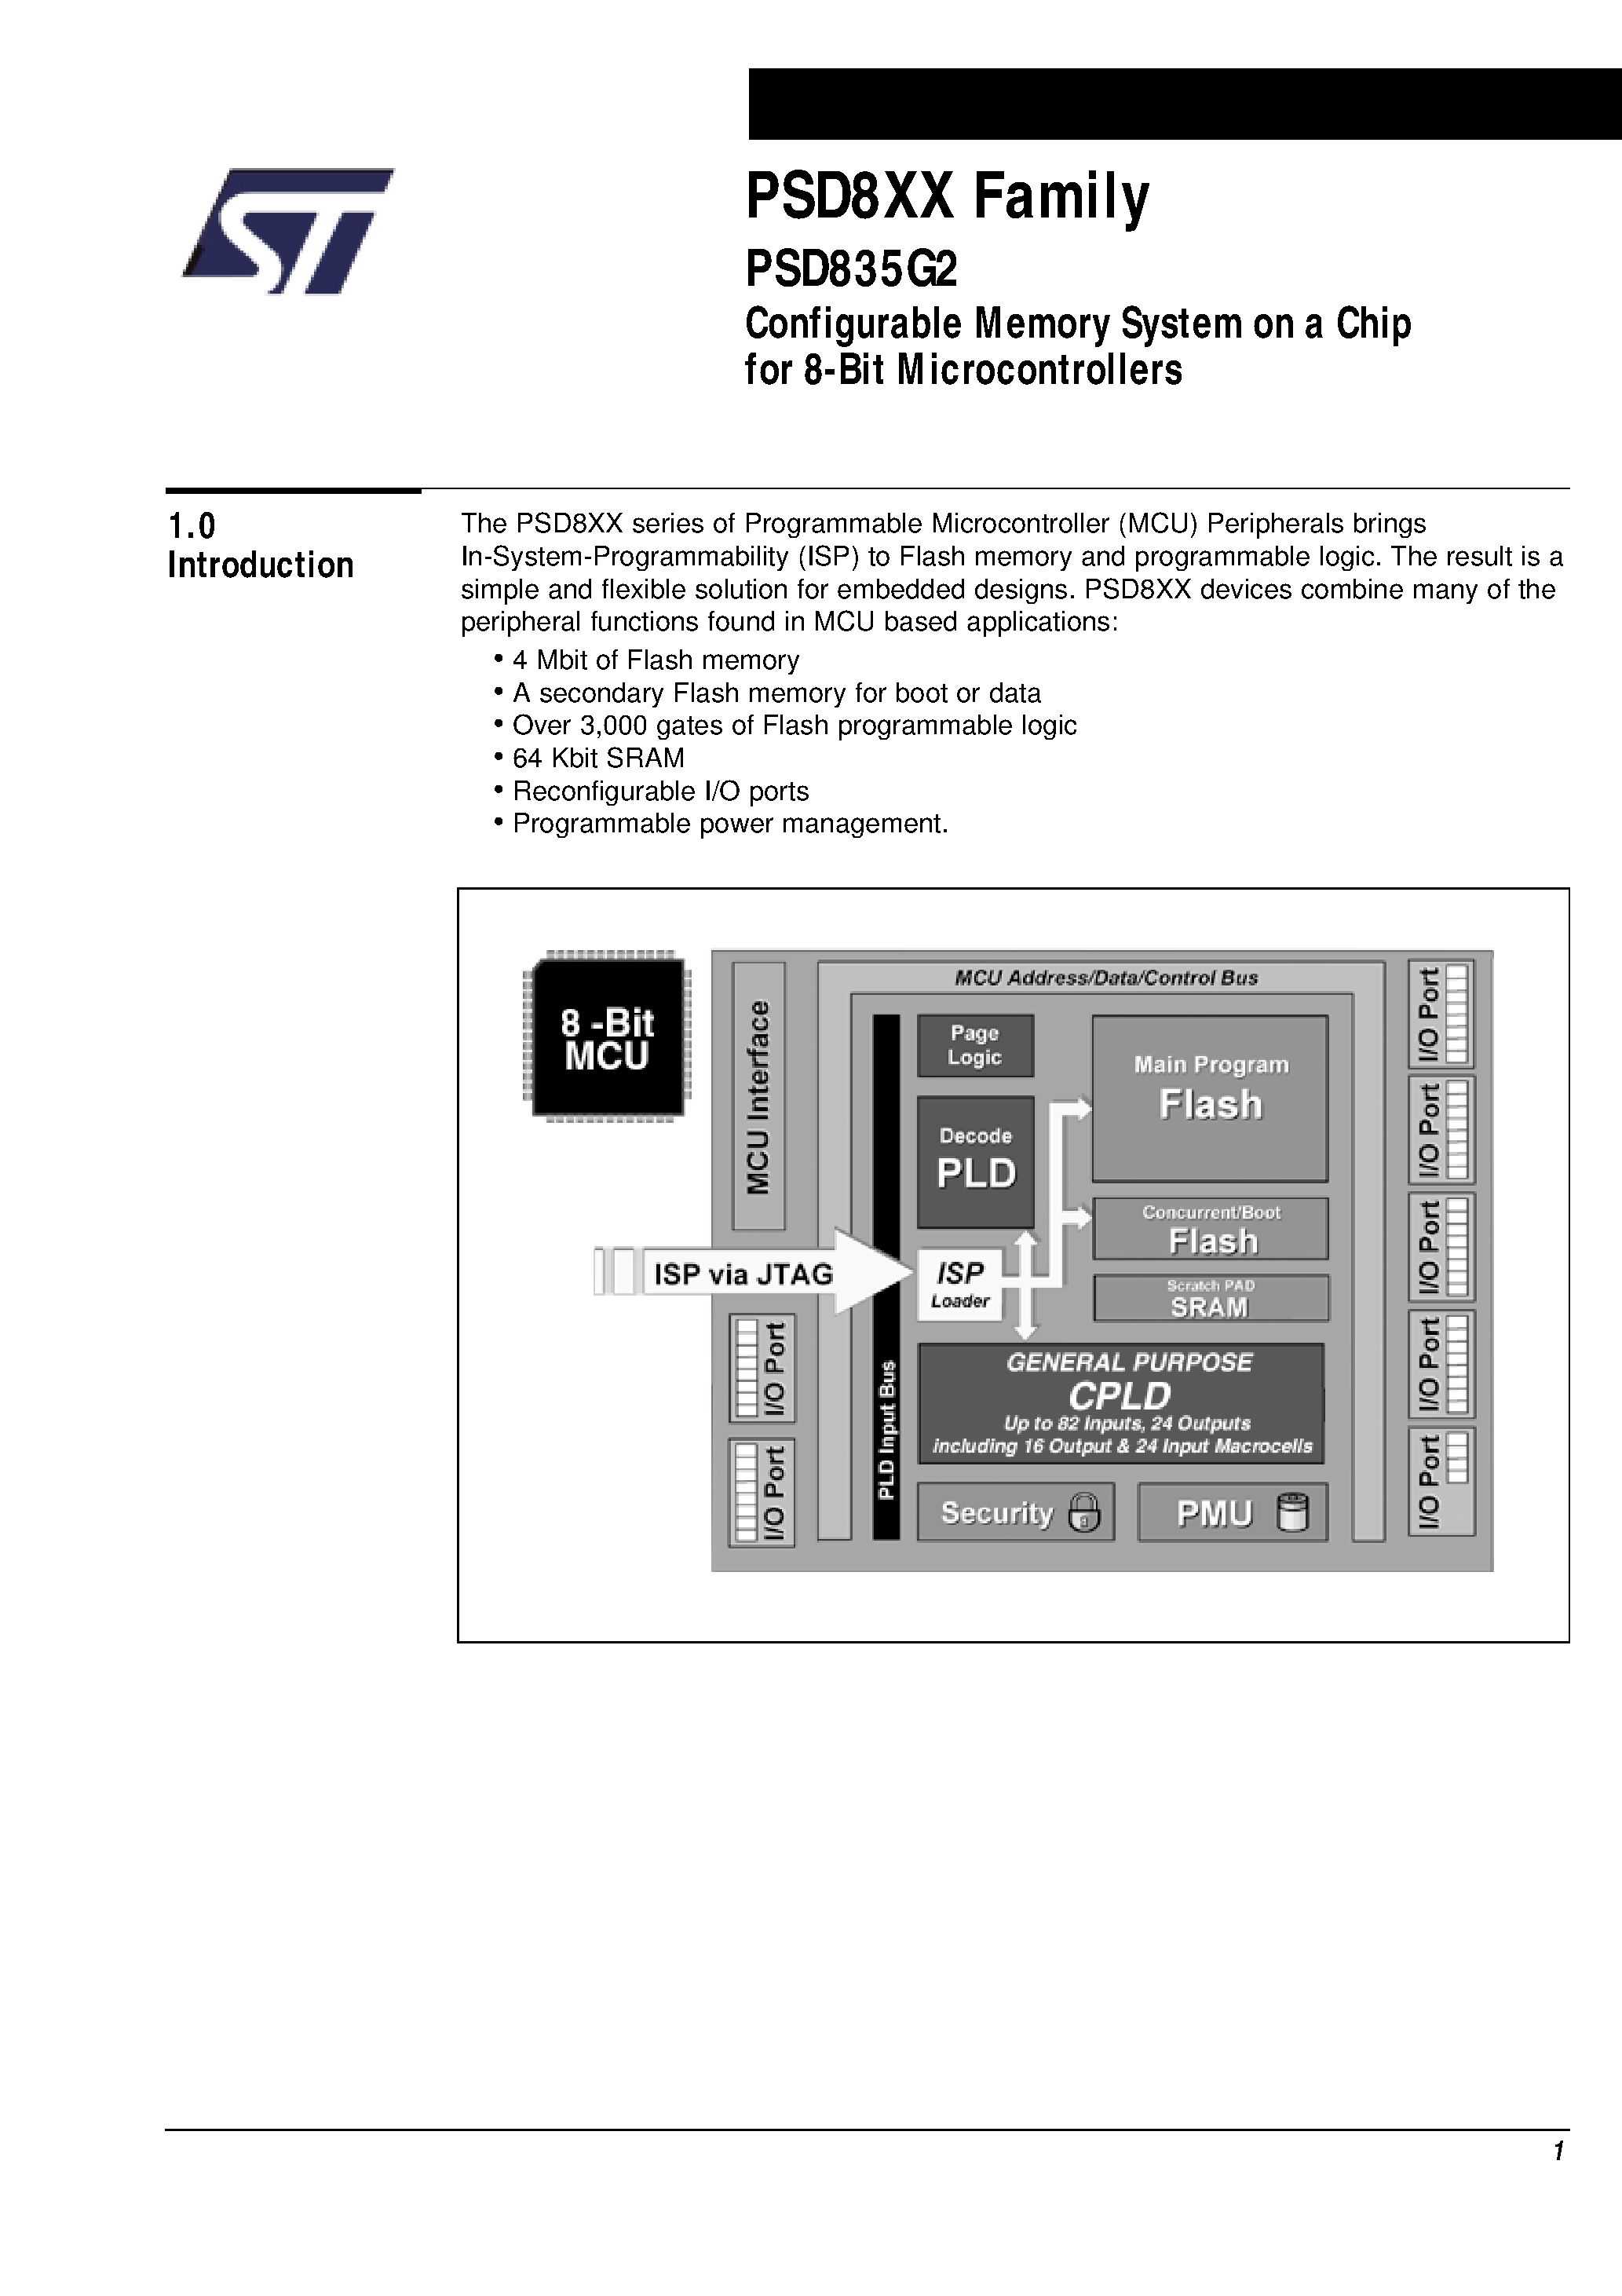 Datasheet PSD835F2V-A-90M - Configurable Memory System on a Chip for 8-Bit Microcontrollers page 2